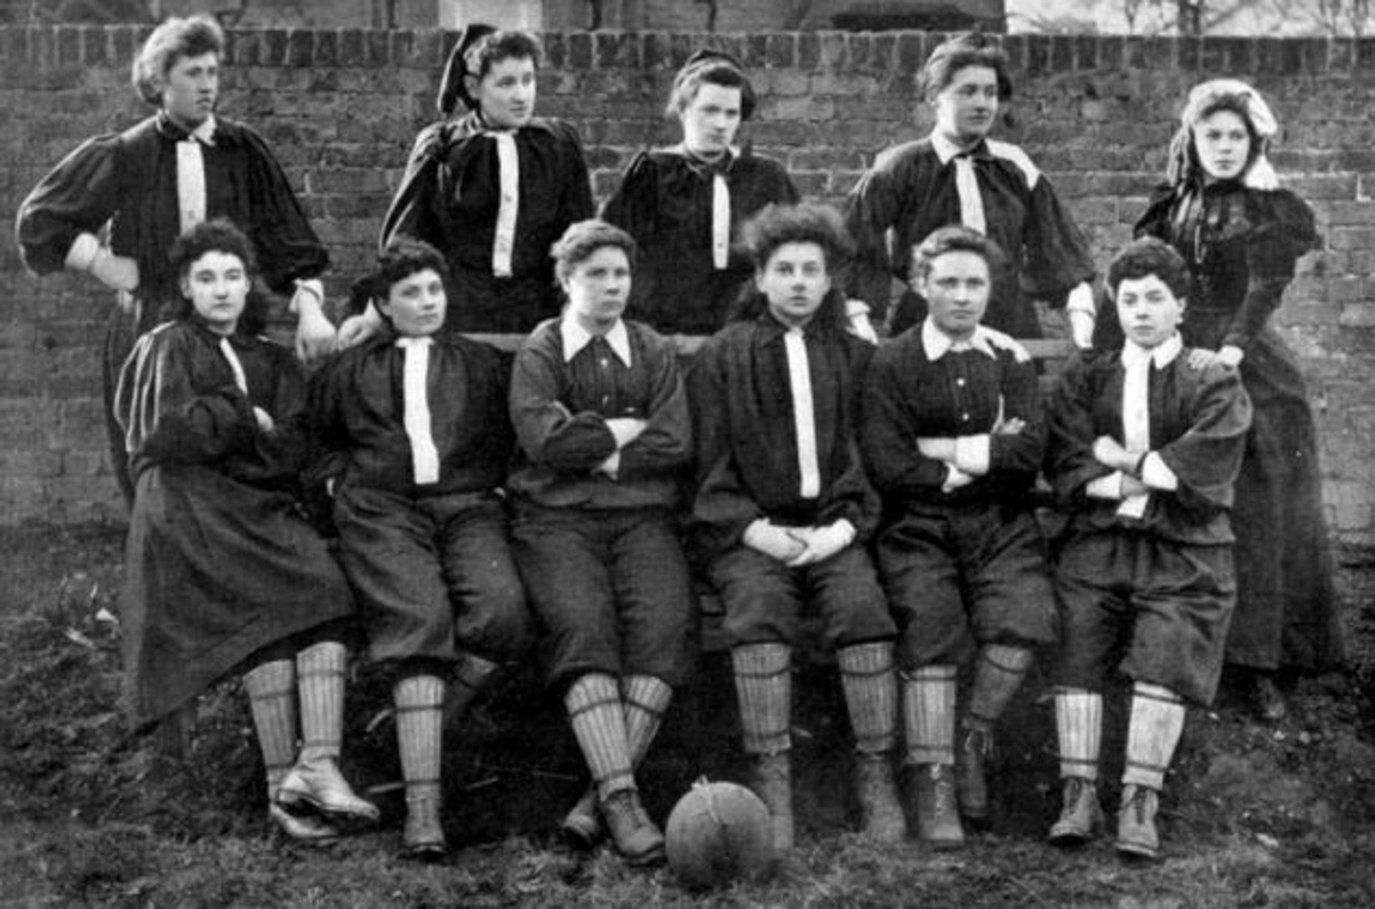 English: The British Ladies Football Club North Team - Mrs Graham's XI was a women's football (soccer) team formed by Helen Matthews in Edinburgh, Scotland in 1881. It is considered the first